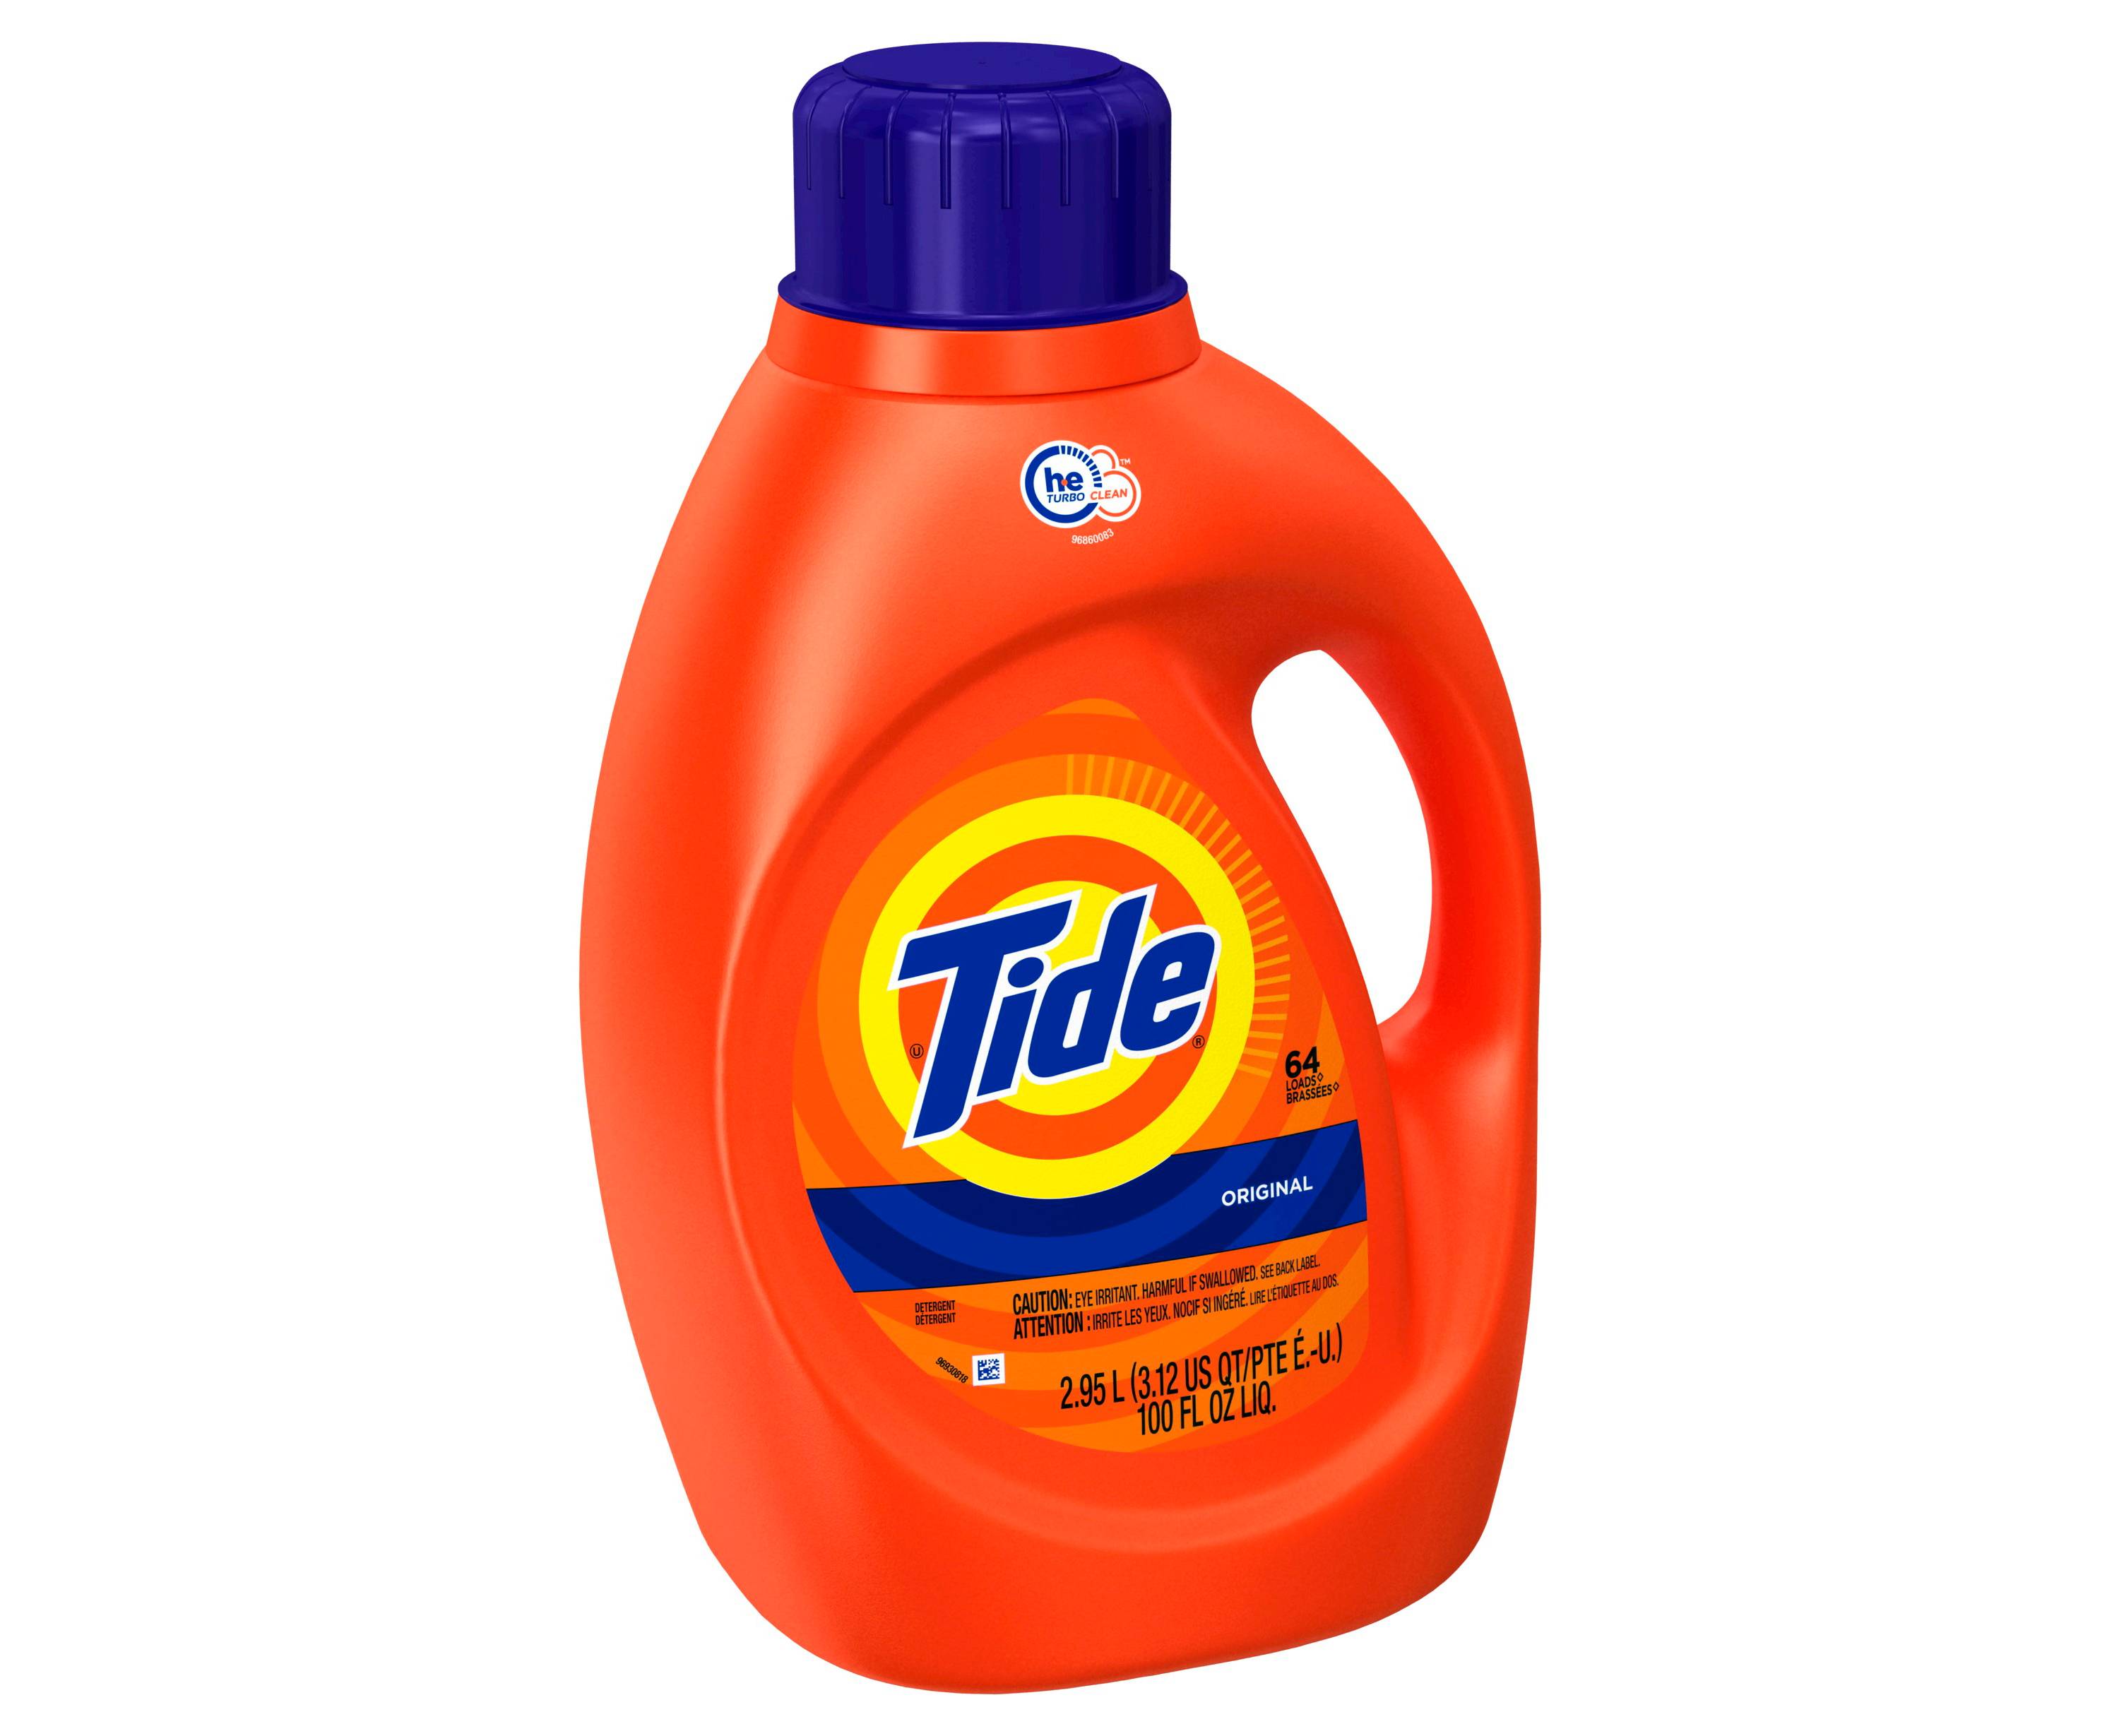 Expires today! 3-count 100oz Tide laundry detergent for $30 + free $10 Target gift card